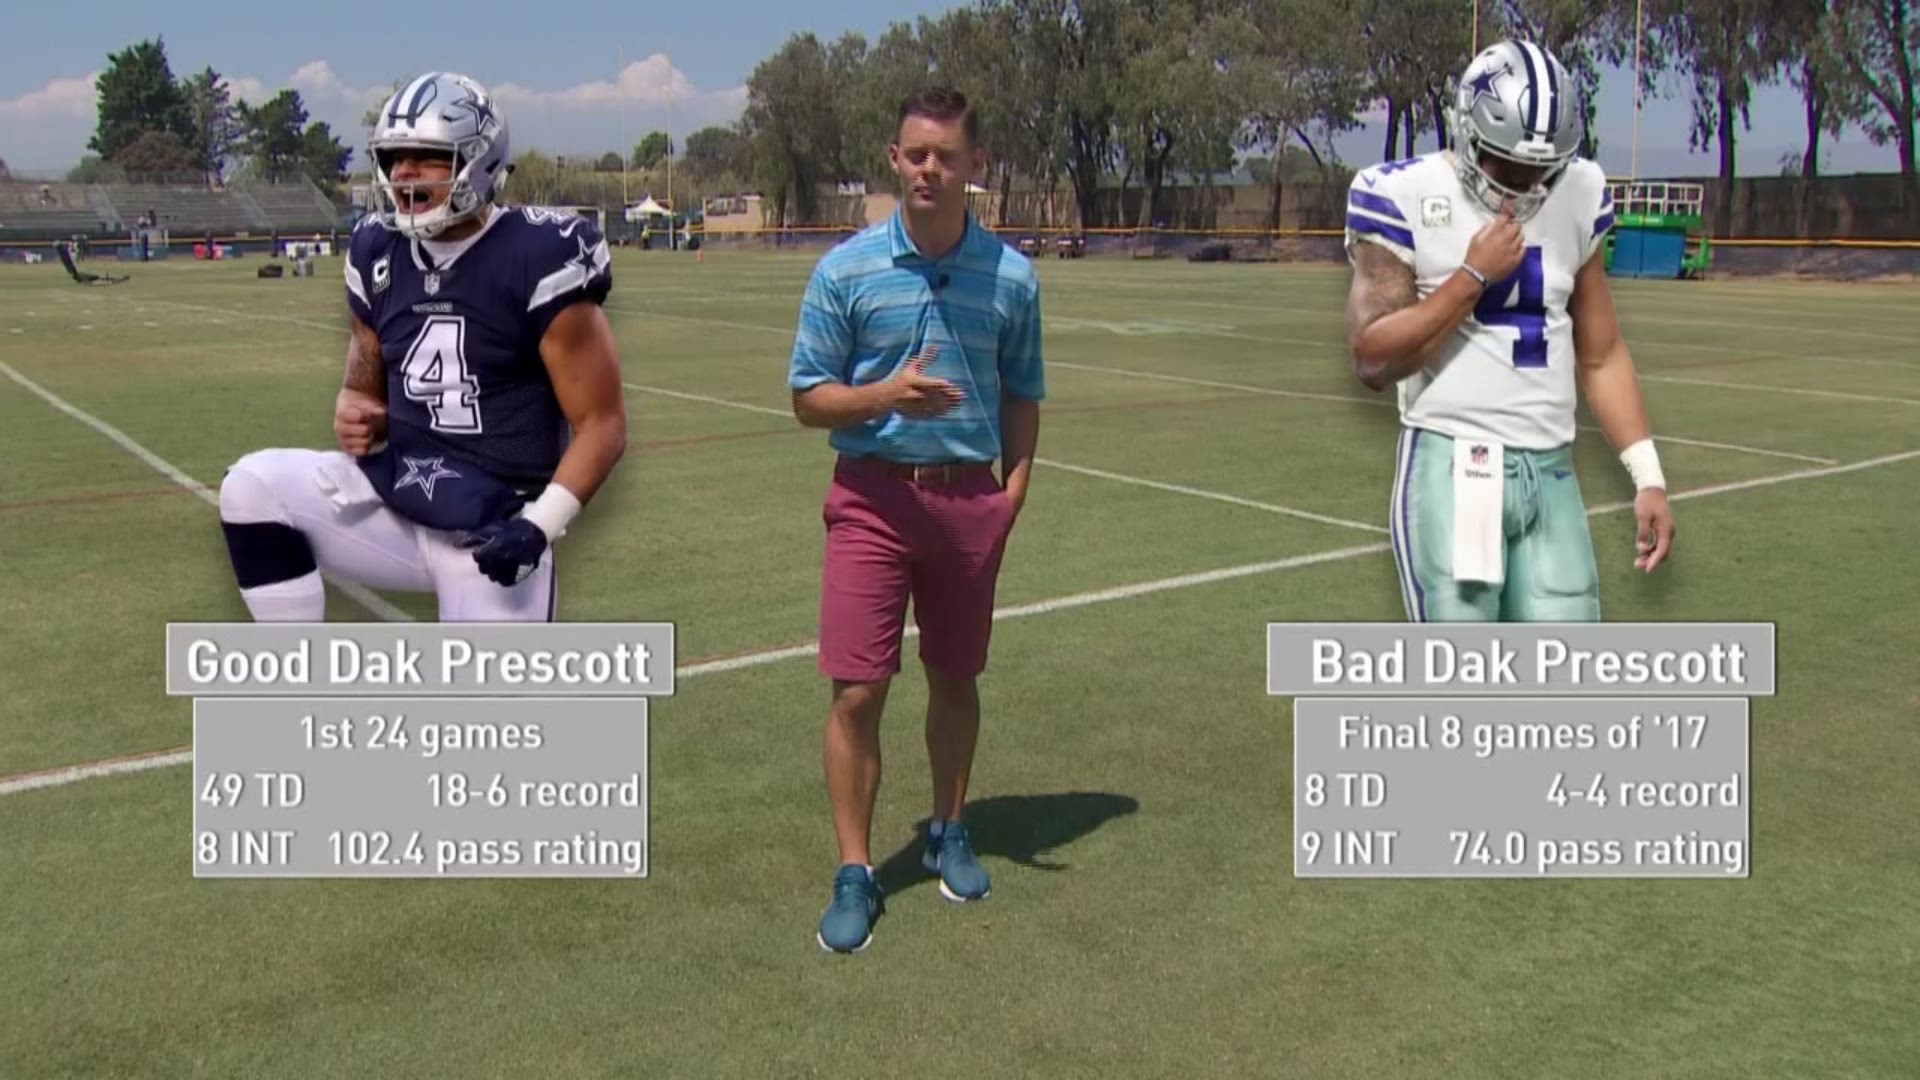 There's been a lot of hand-wringing over whether the Dallas Cowboys will get good Dak Prescott or bad Dak Prescott in 2018.

But breaking it down as 2016 Dak vs. 2017 Dak isn't fair, nor is it really factual.